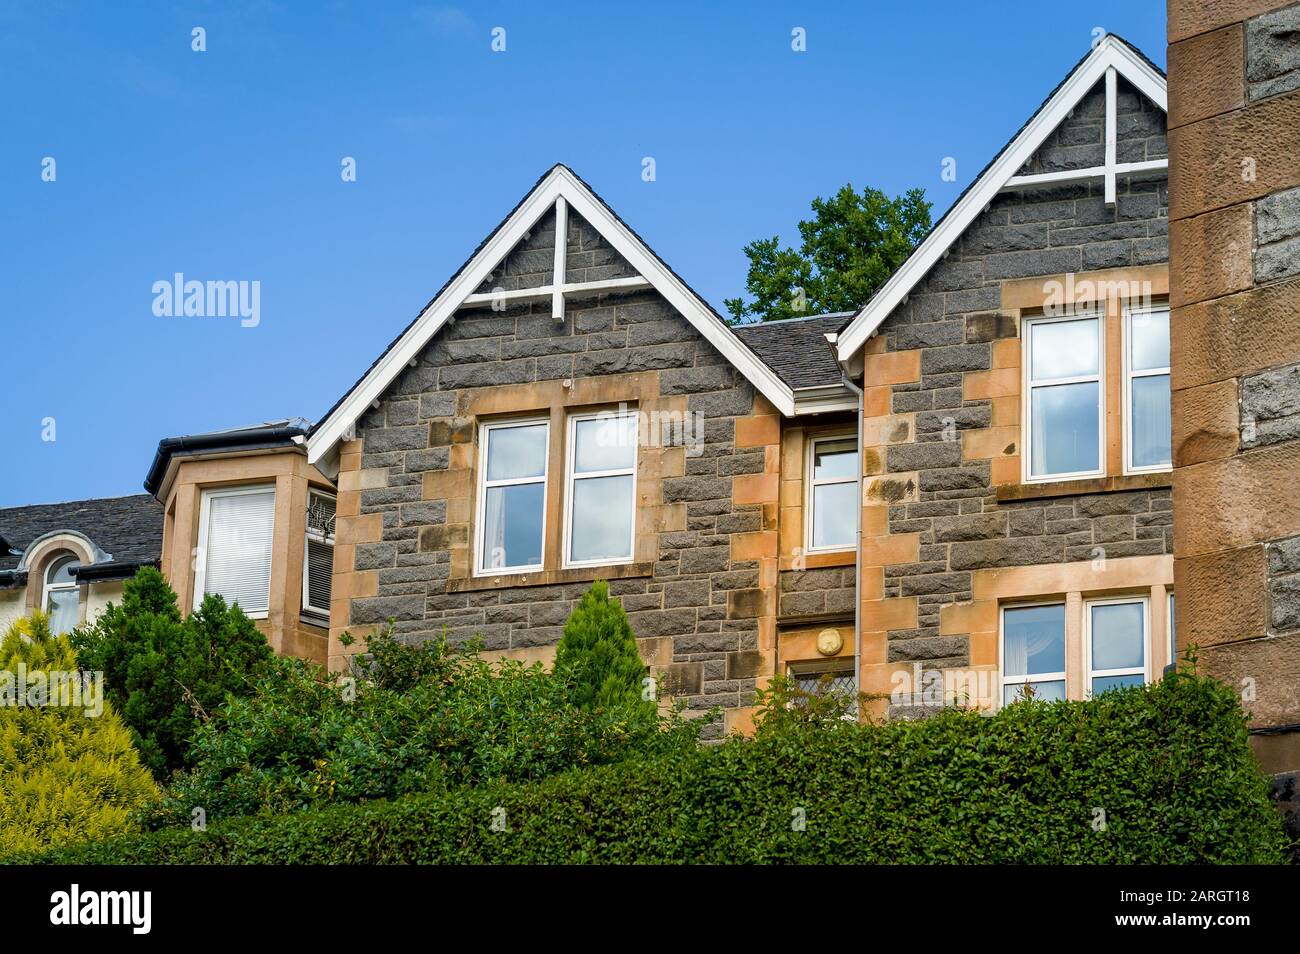 Facades of traditional scottish houses. Oban old town, Scotland. Stock Photo